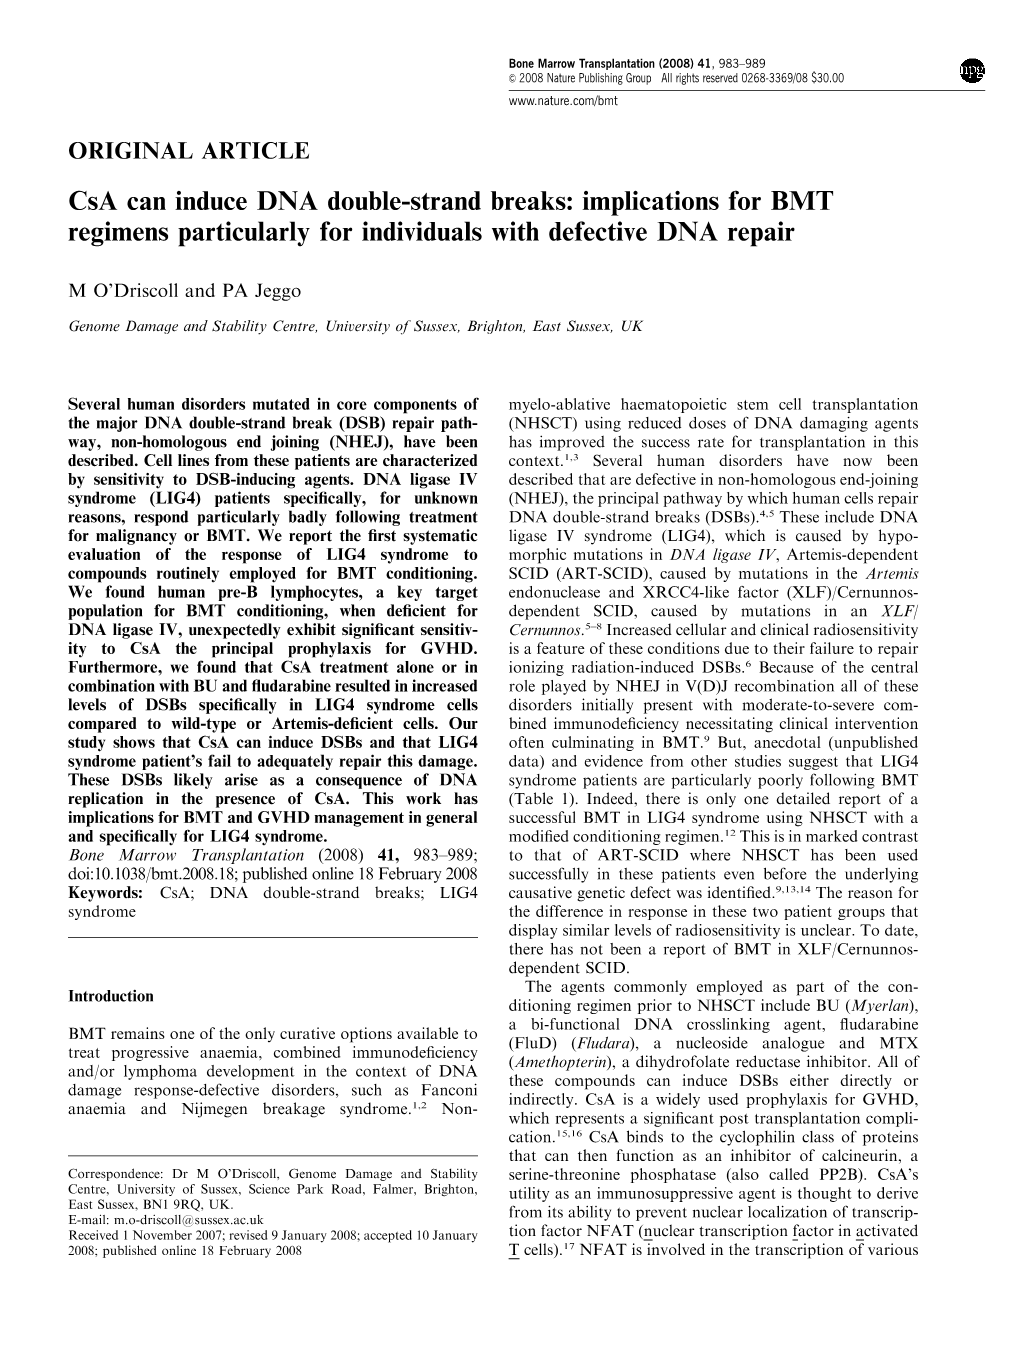 Csa Can Induce DNA Double-Strand Breaks: Implications for BMT Regimens Particularly for Individuals with Defective DNA Repair